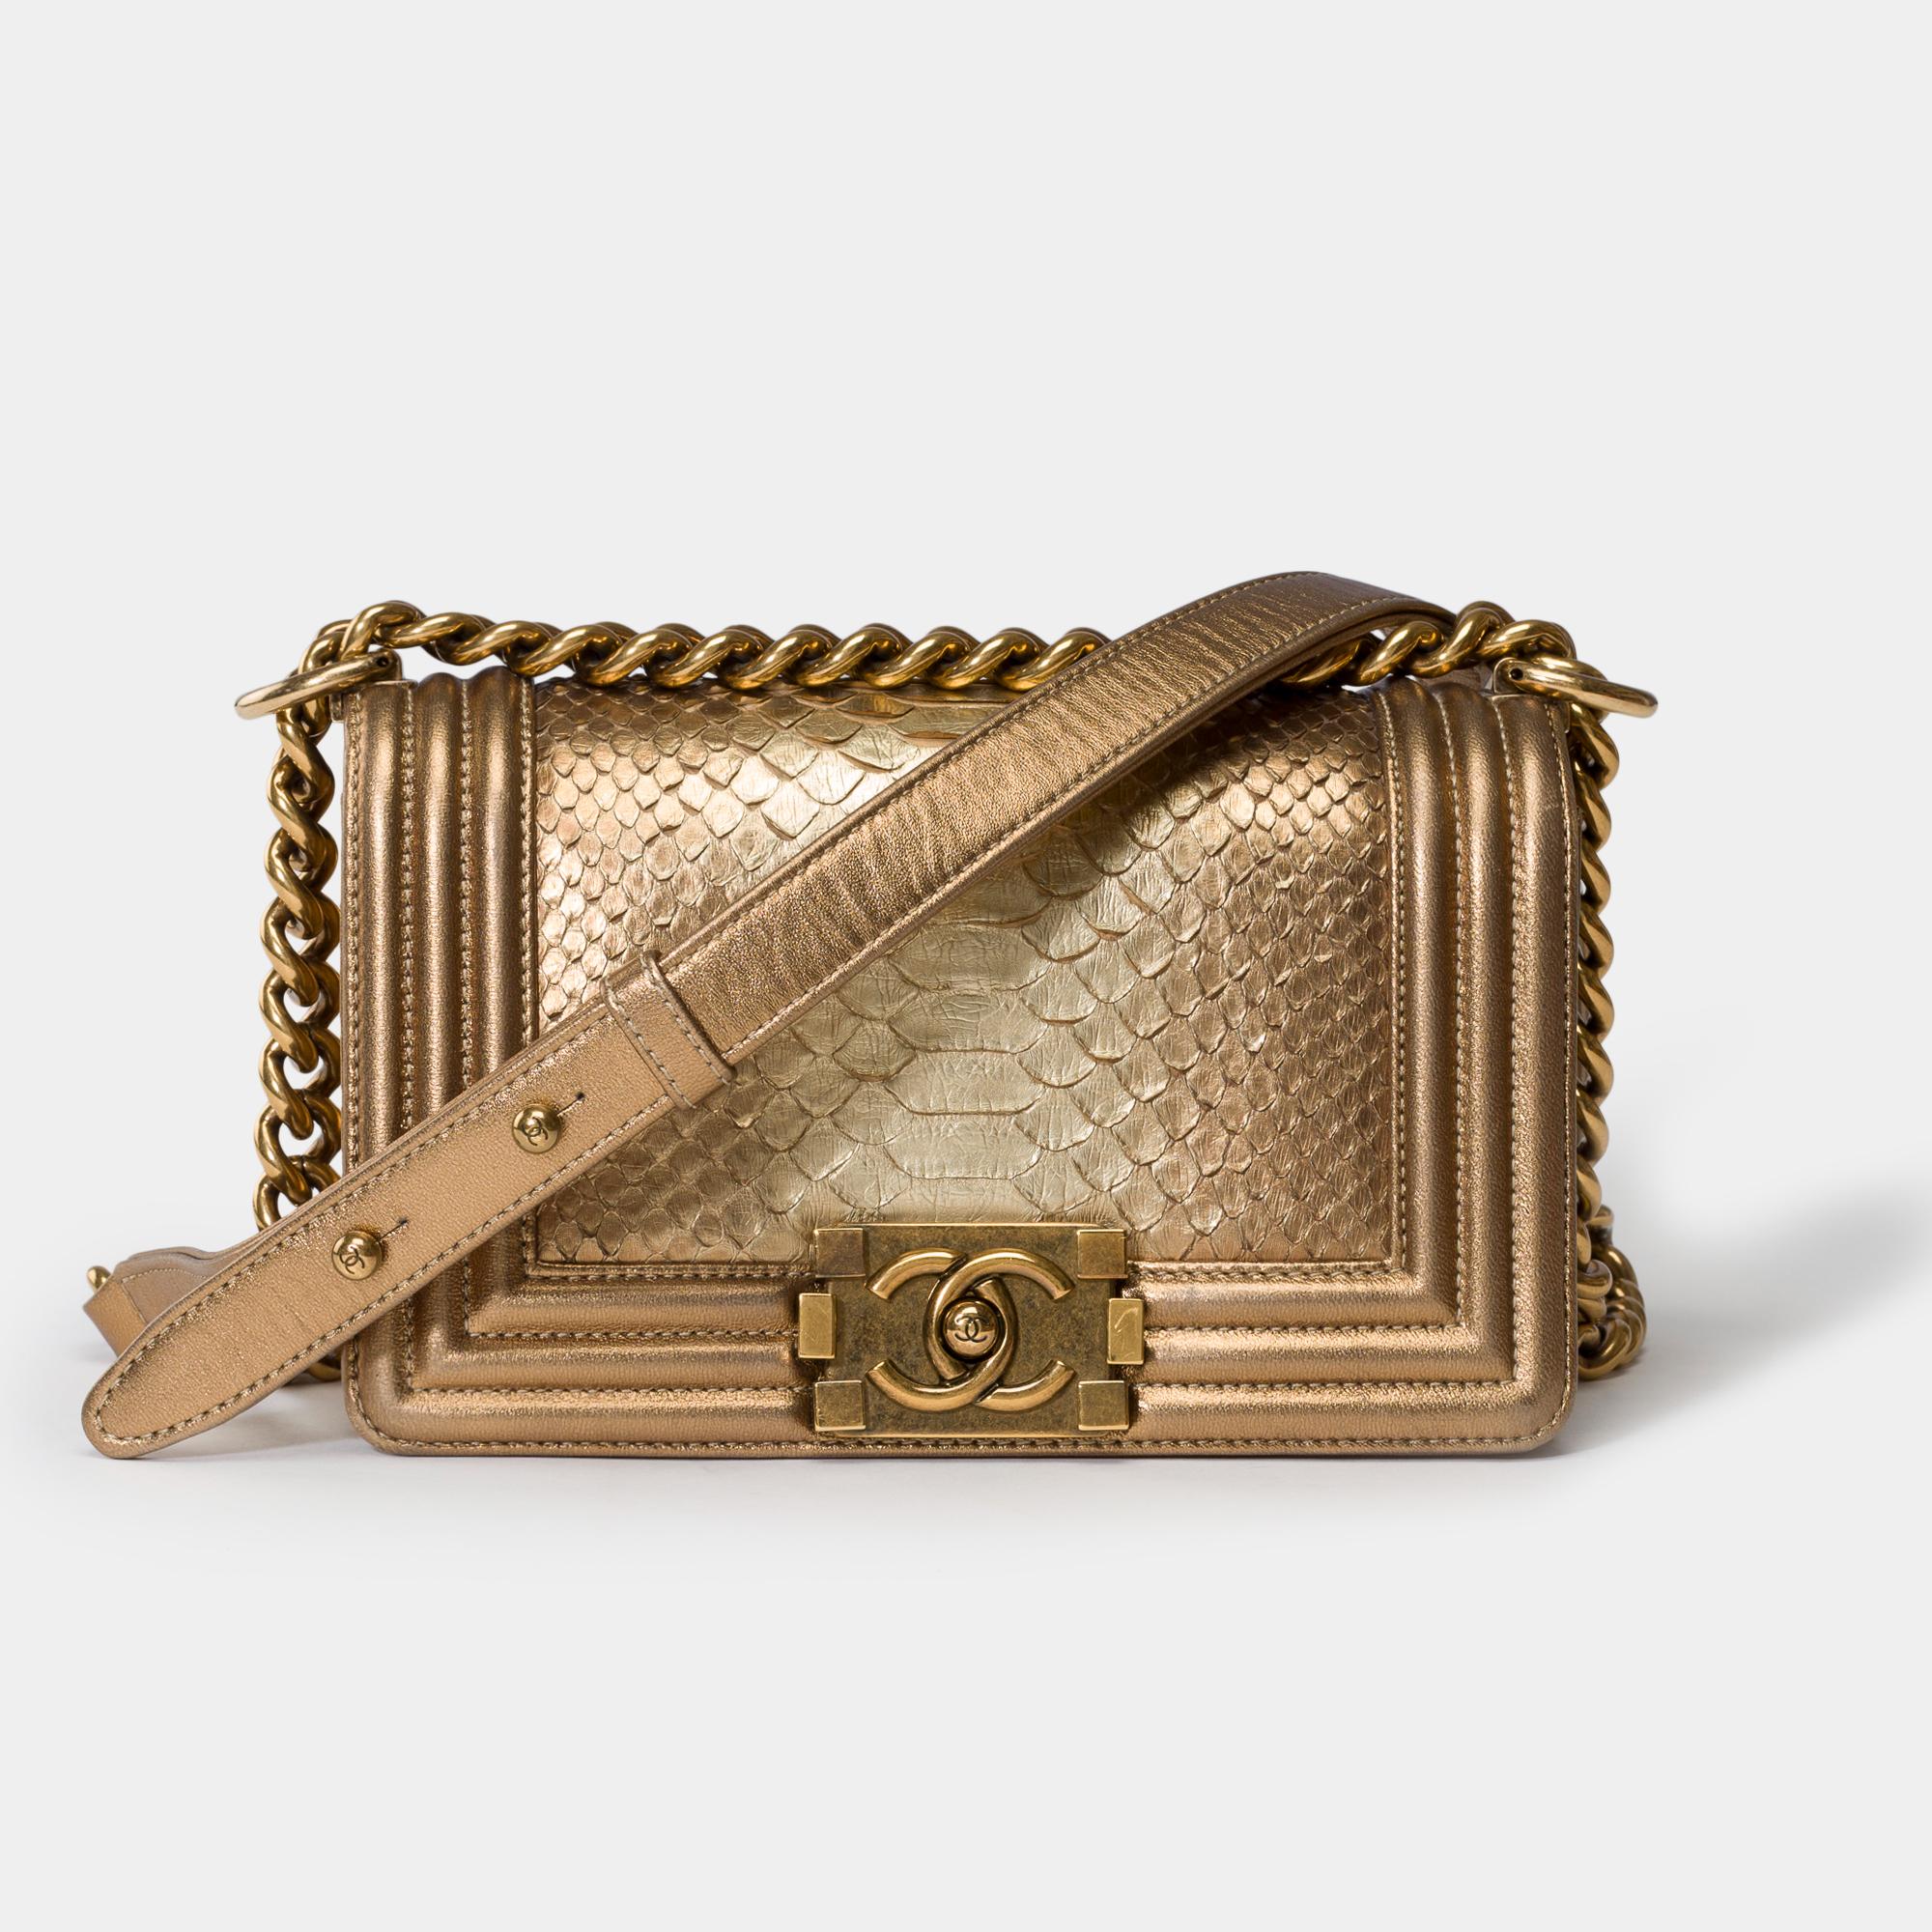 Splendid​ ​&​ ​Rare​ ​Chanel​ ​Boy​ ​Small​ ​shoulder ​bag​ ​in​ ​golden​ ​python leather ,​ ​gold​ ​metal​ ​trim,​ ​an​ ​adjustable​ ​chain​ ​handle​ ​in​ ​golden​ ​metal​ ​allowing​ ​a​ ​shoulder​ ​or​ ​crossbody​ ​carry

A​ ​gold​ ​metal​